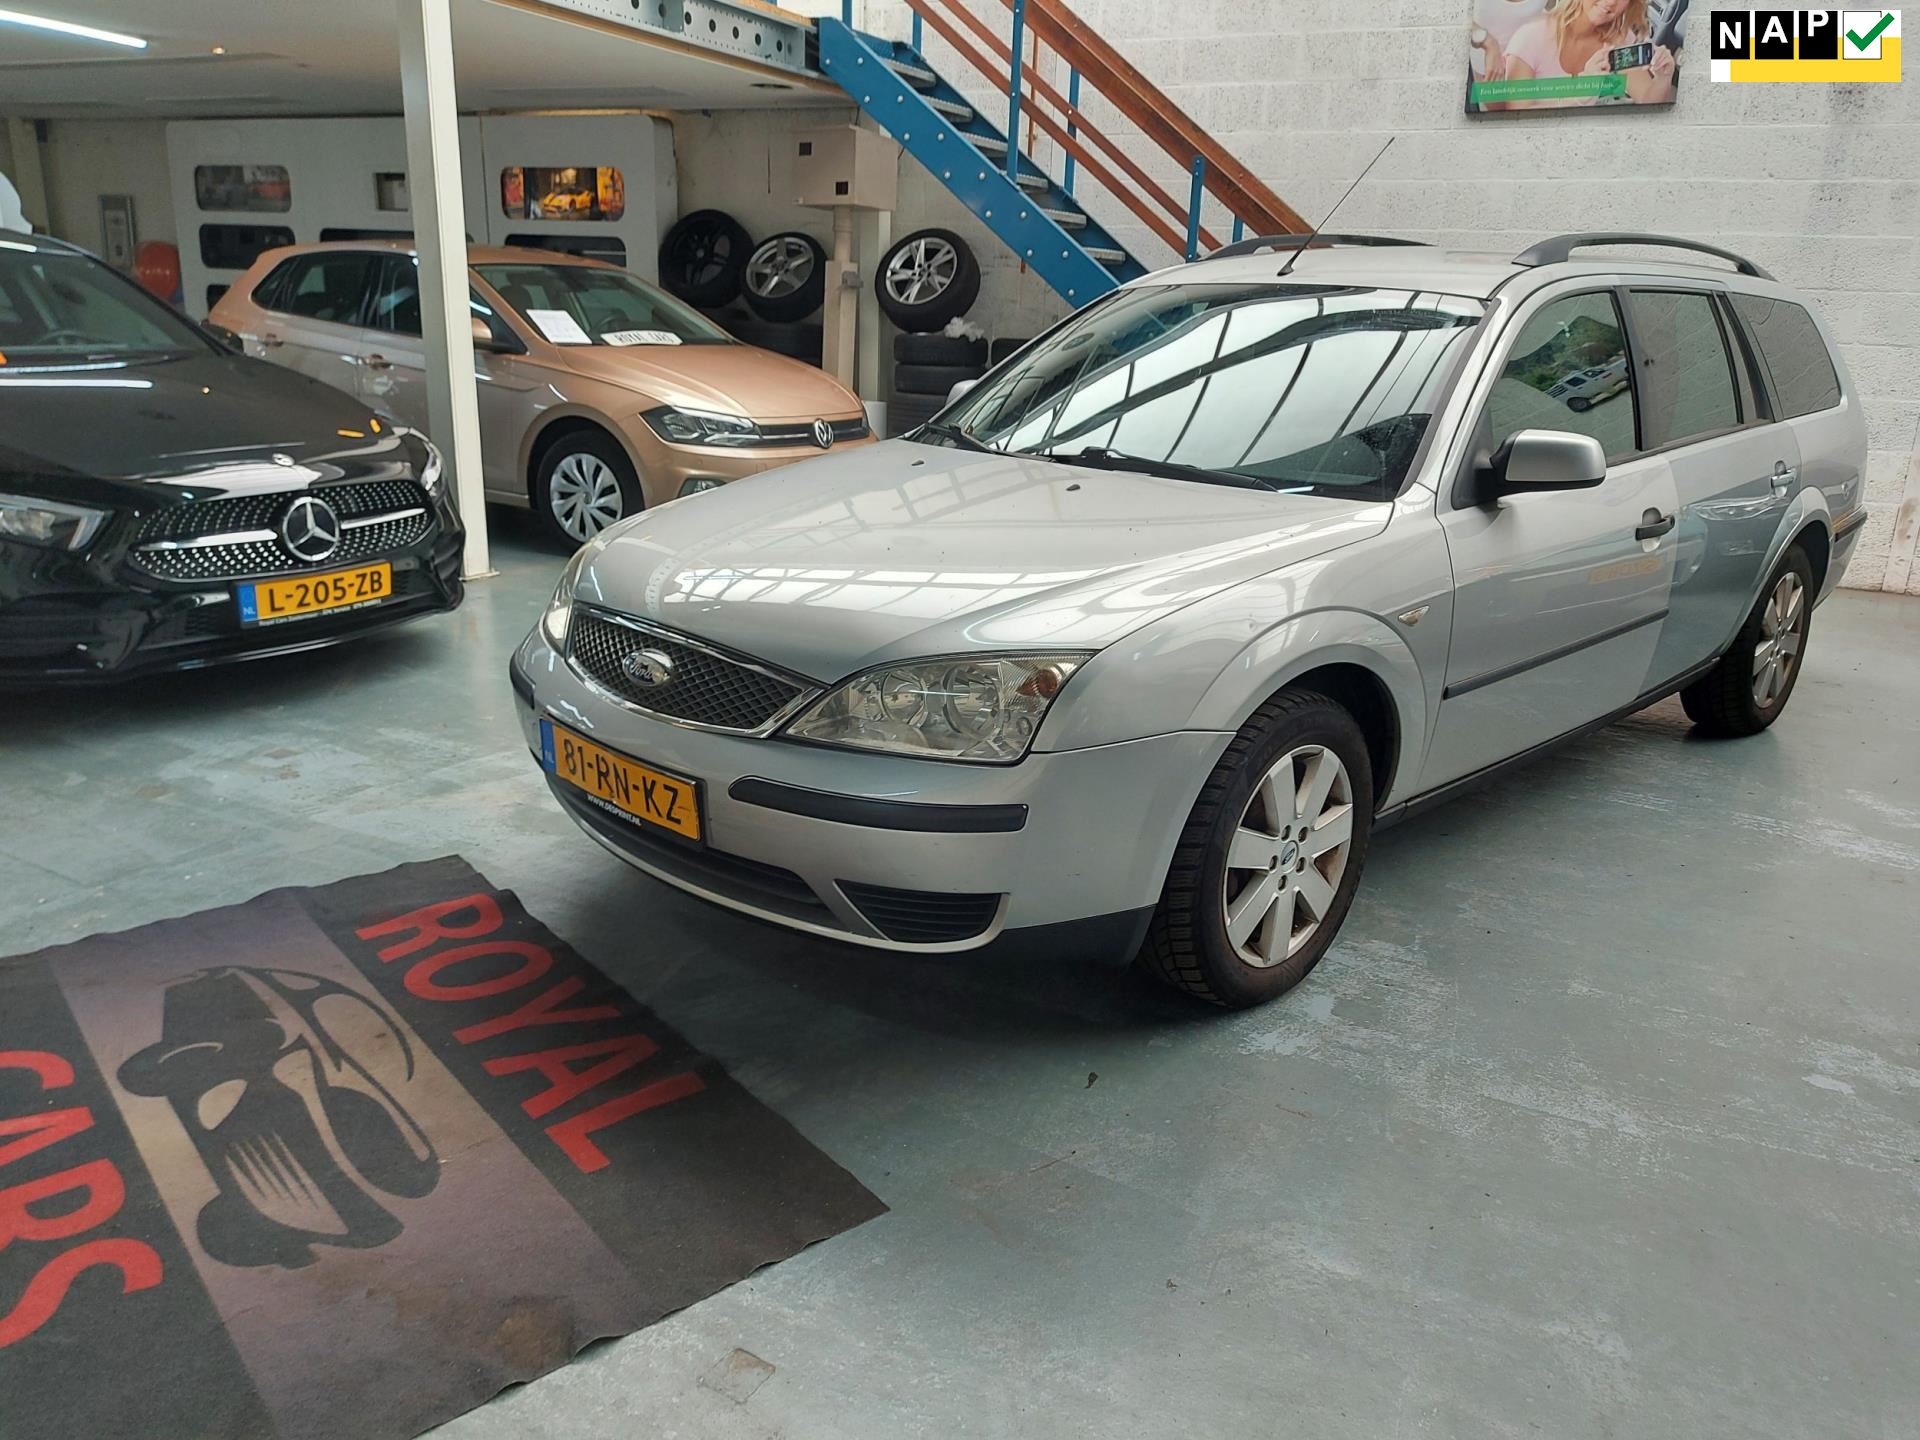 dump Toevlucht formaat Ford Mondeo Wagon - 1.8- 16V Ambiente/ Nap/ Apk/ Airco/ Trekhaak Benzine  uit 2005 - www.royal-cars.nl